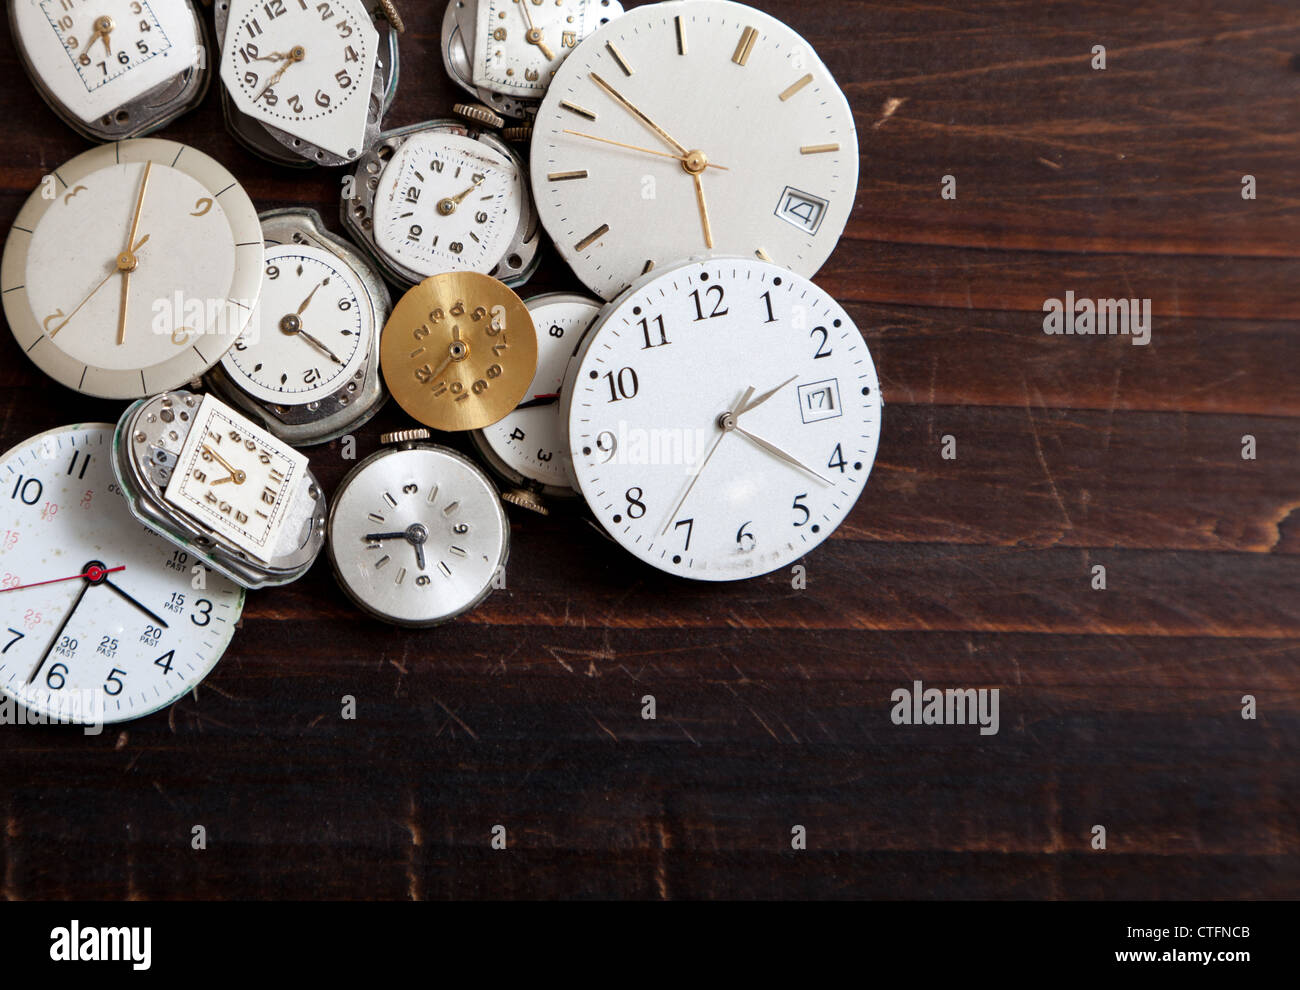 Assorted old, wrist watch faces creating a background Stock Photo